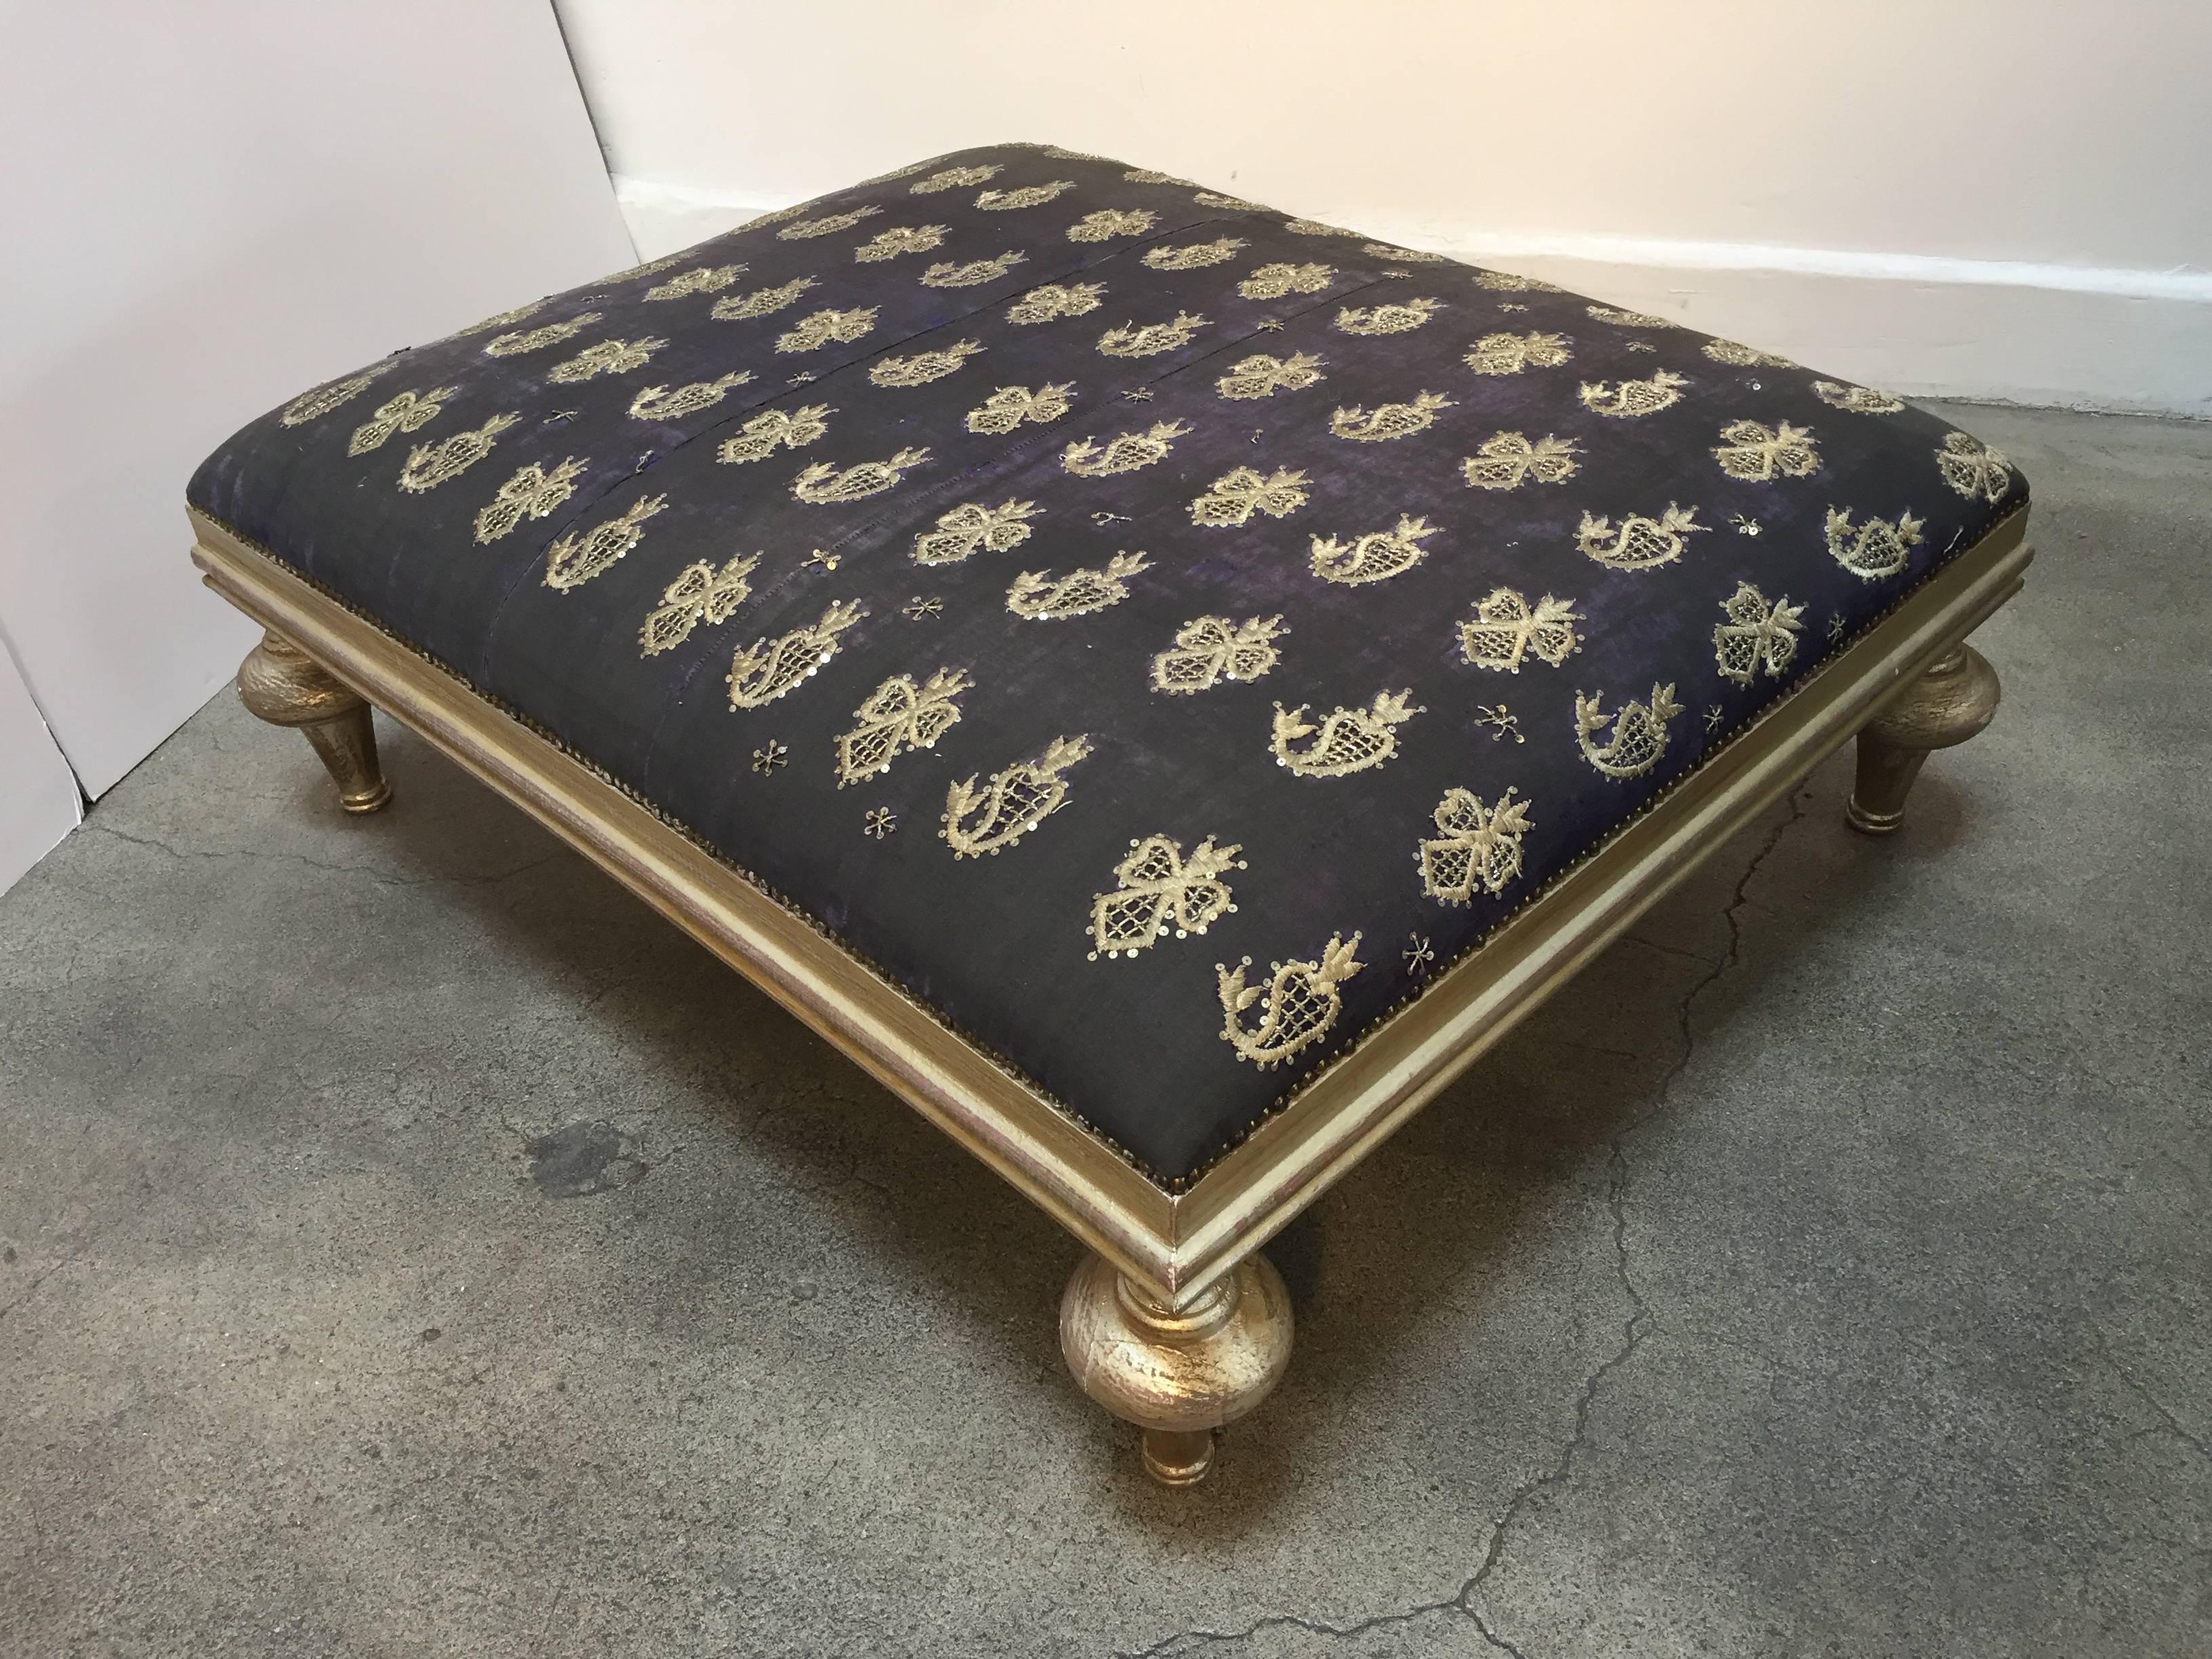 Embroidered Middle Eastern Coffee Table or Ottoman from Lebanon